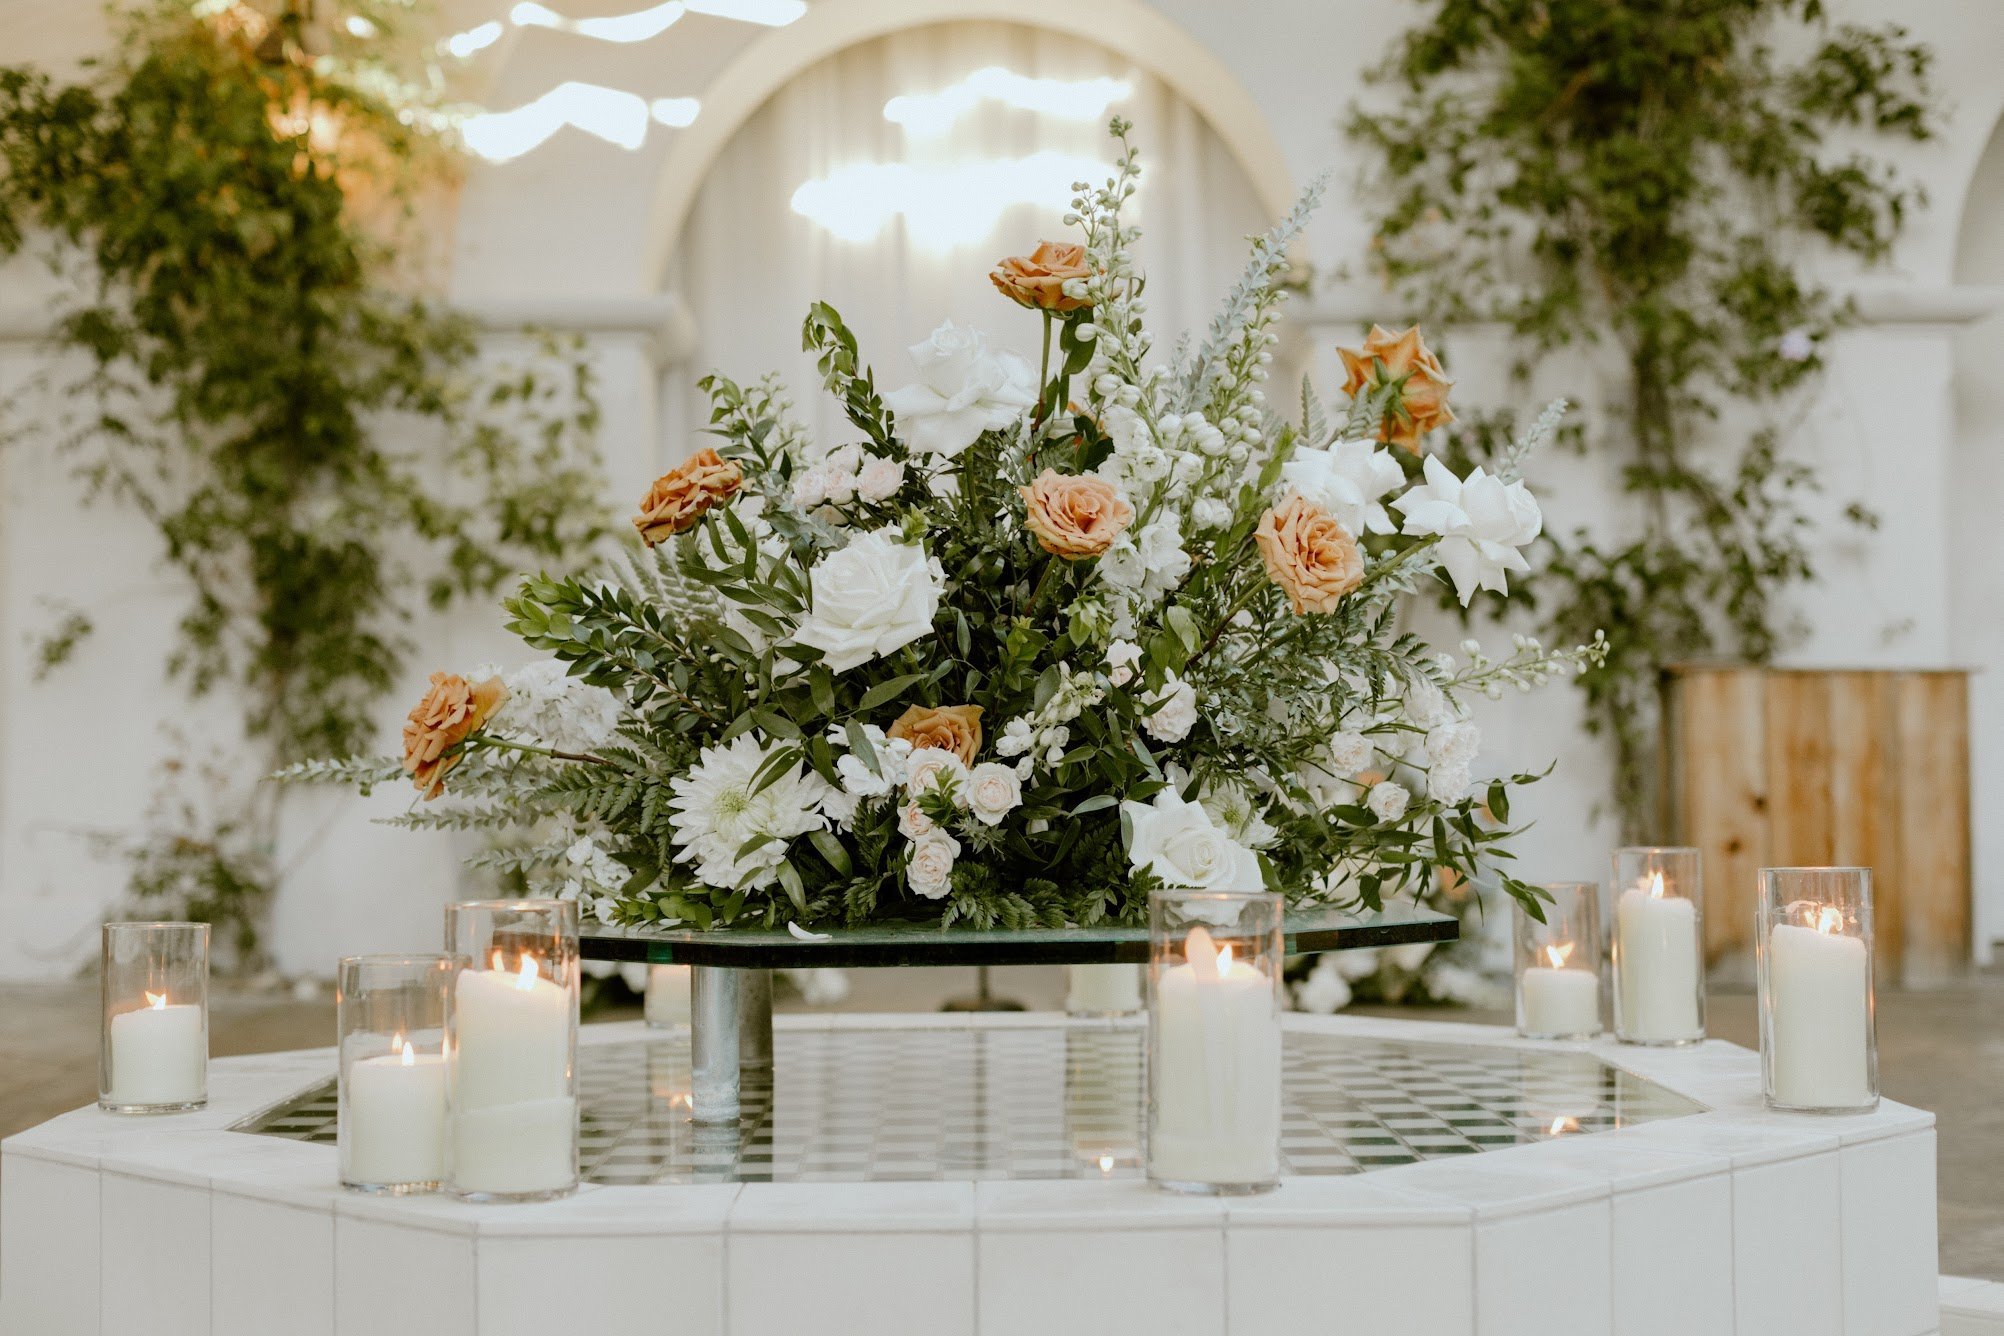 www.santabarbarawedding.com | Boho Chic Dreams | Katie Ruther | Ann Johnson Events | Villa &amp; Vine | Orange and White Floral Design in Middle of the Room